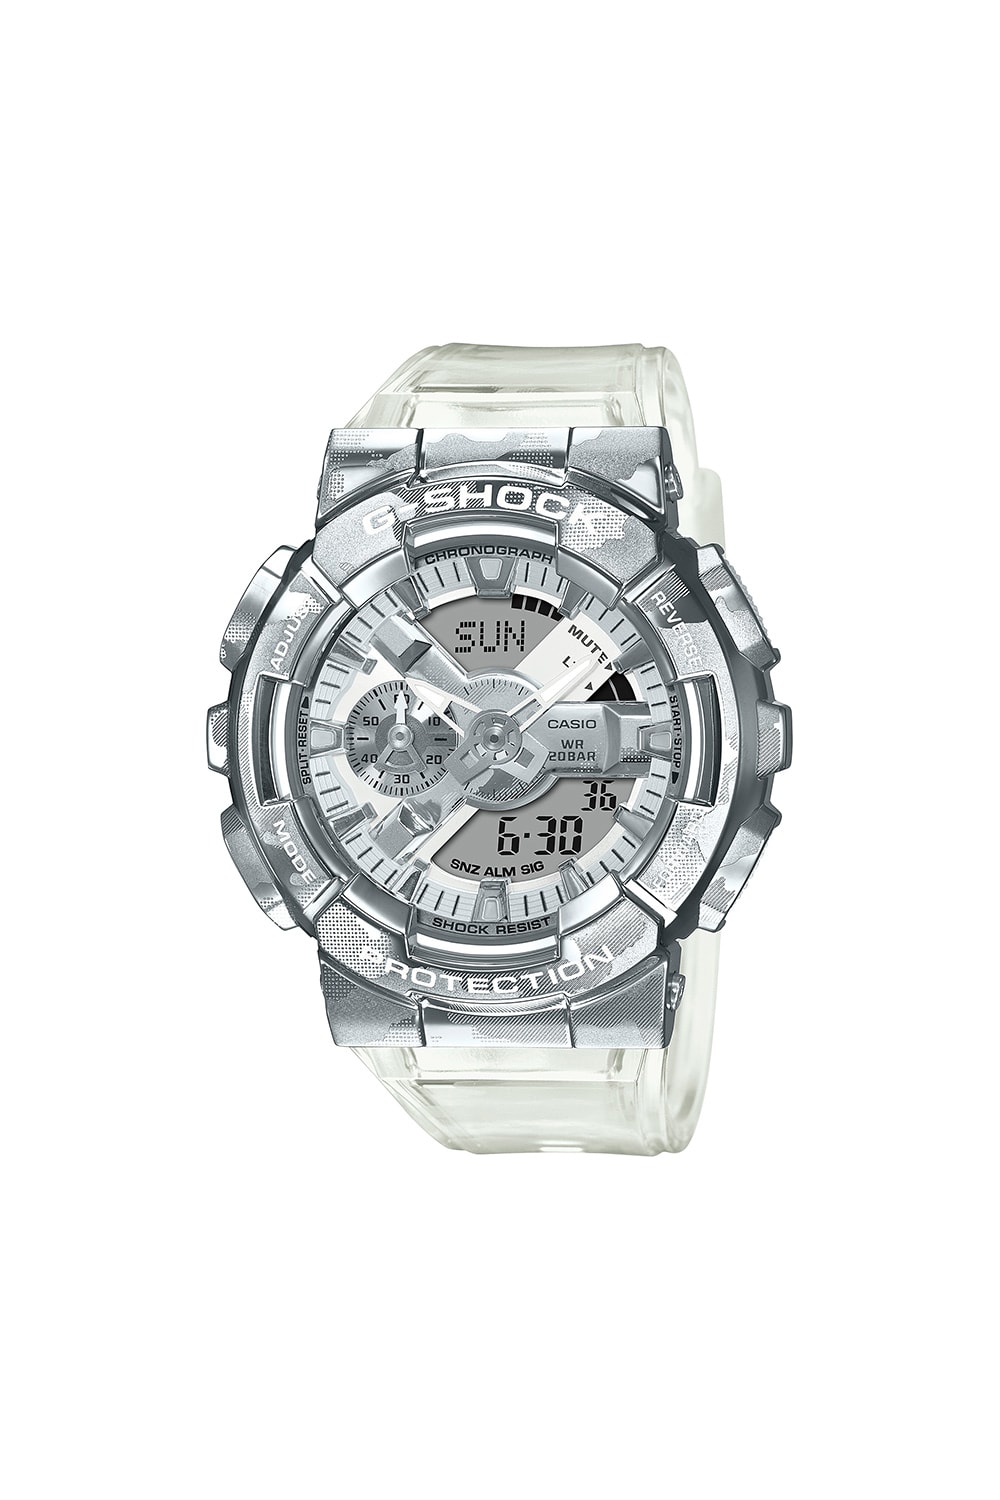 casio g shock metal skeleton gold series GM 110 GM 5600 GM 6900 9 watches watch accessories collectibles release